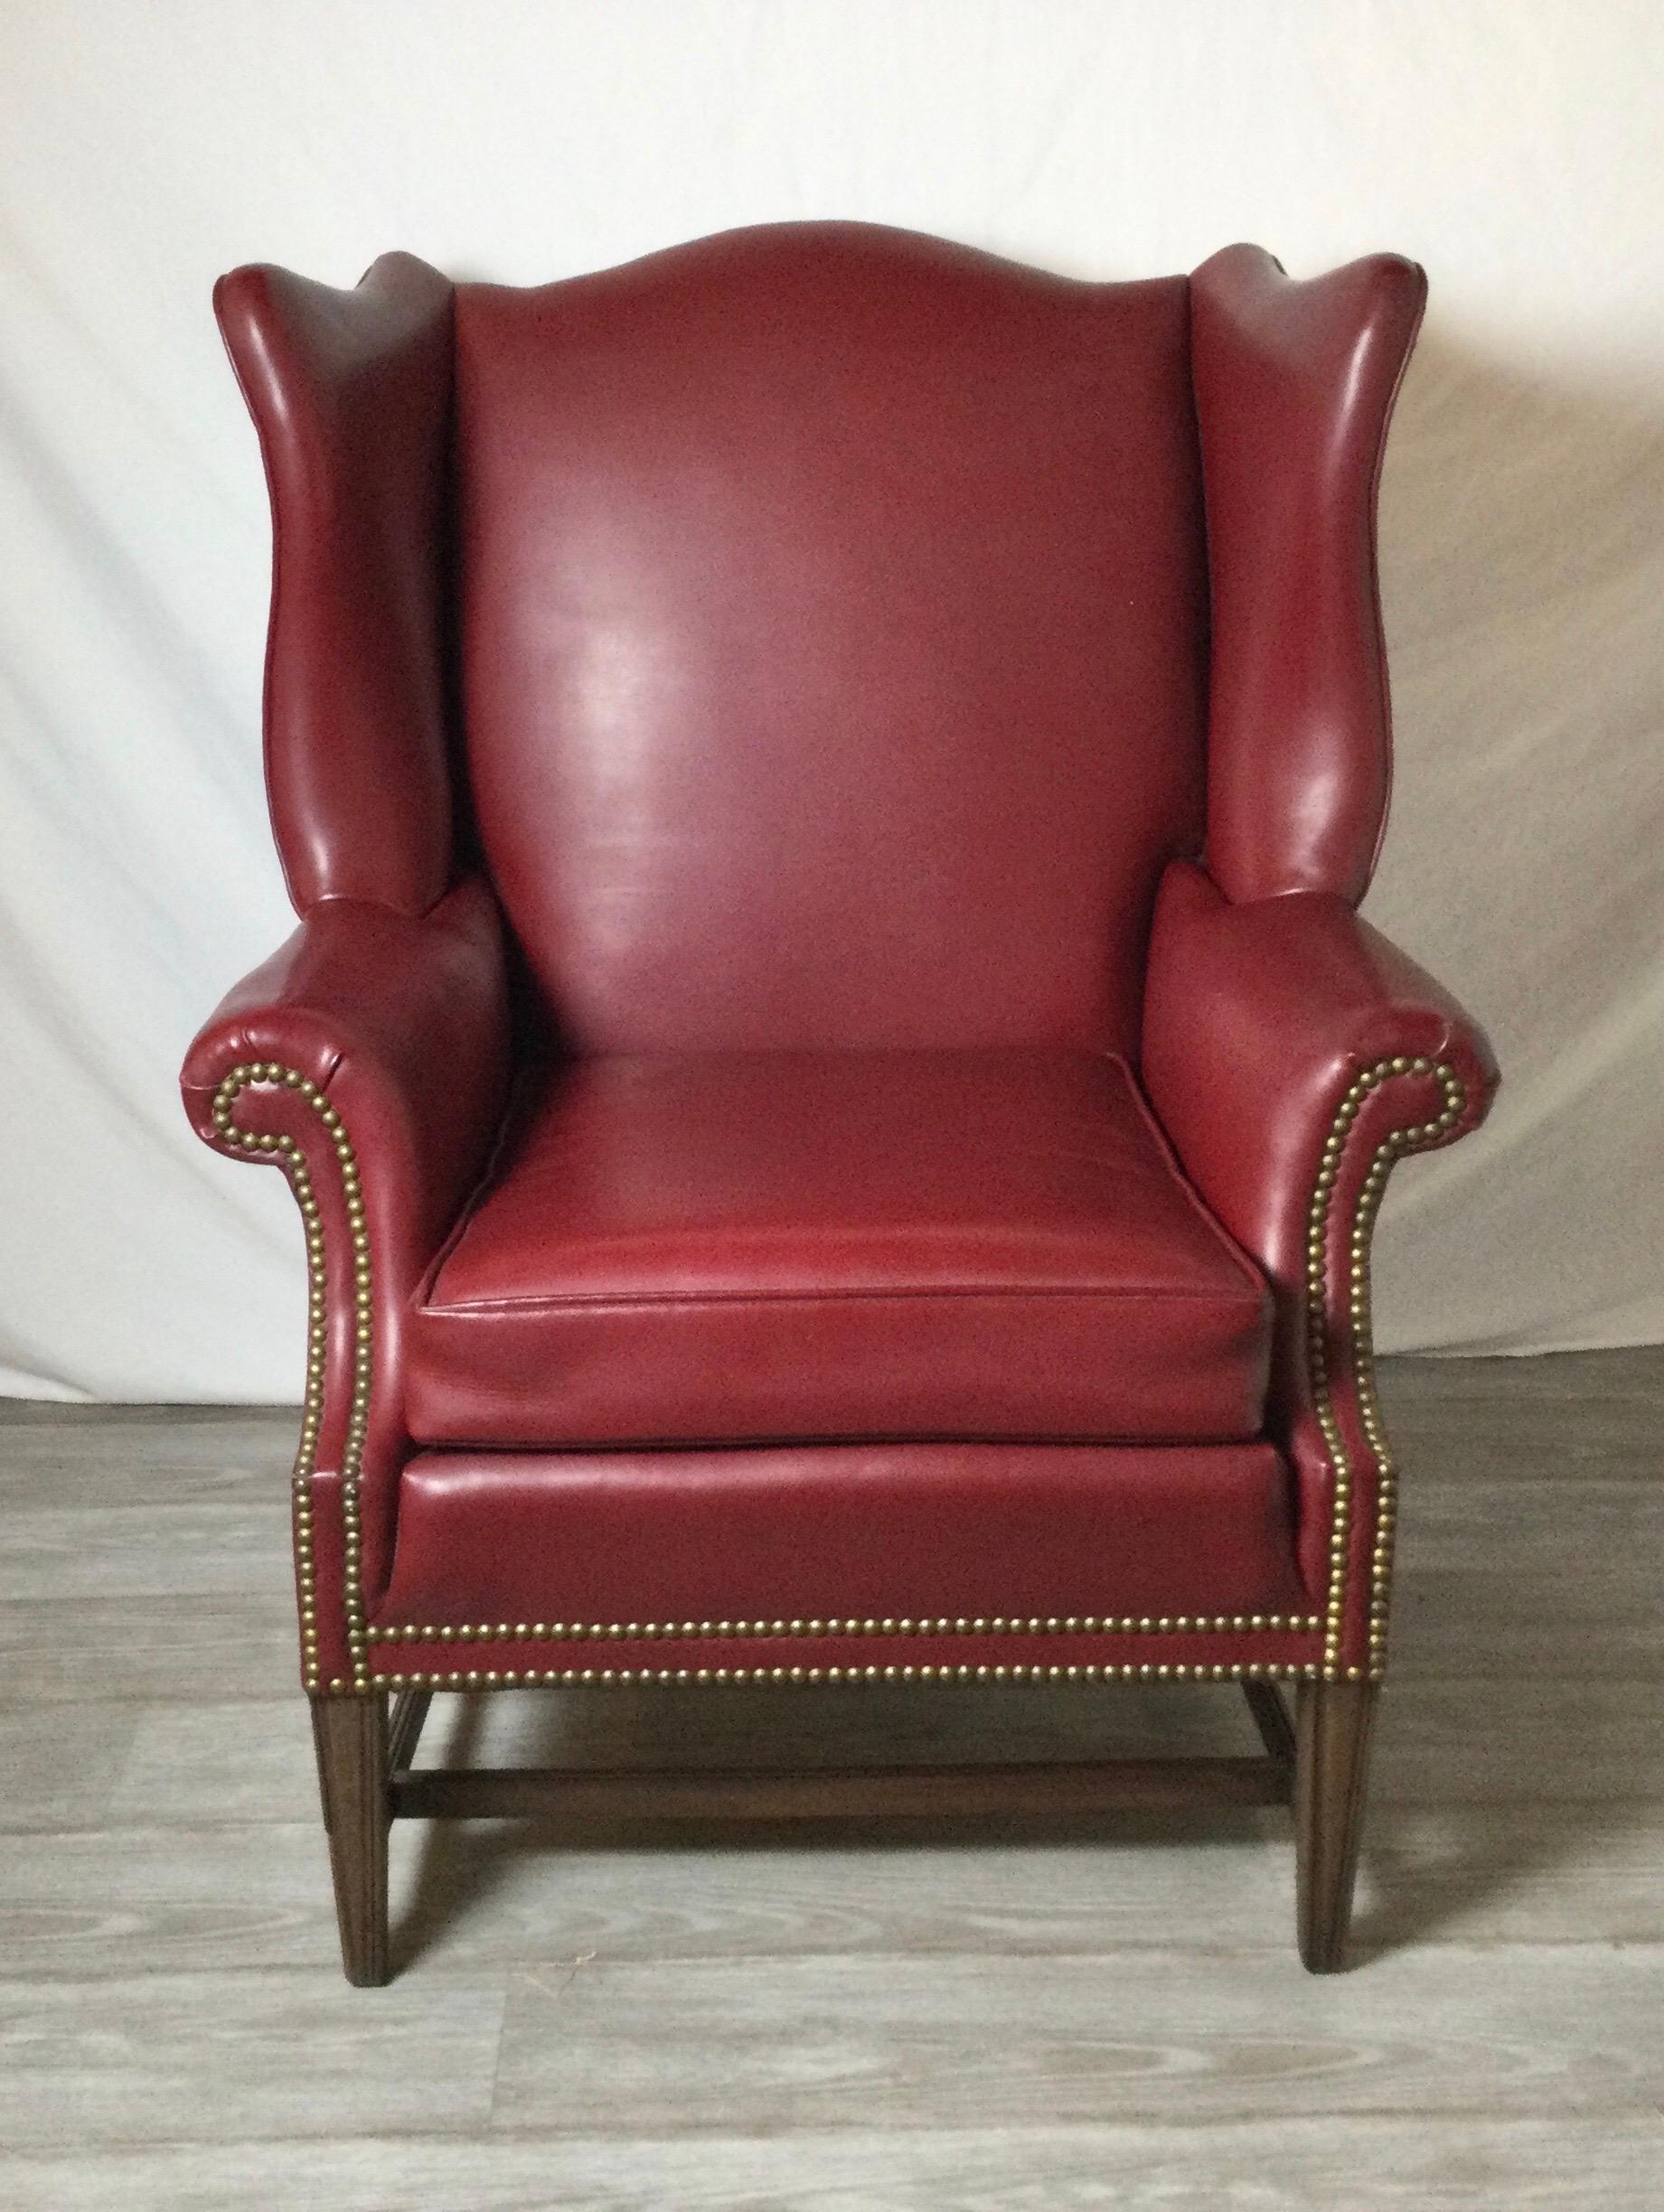 A large and comfortable Cordovan leather shapely Devon style wing chair. The large back with flared wings with a loos leather cushion seat with brass nail head trim. The exposed legs are mahogany. Made in the mid 20th century by Hickory Chiara.